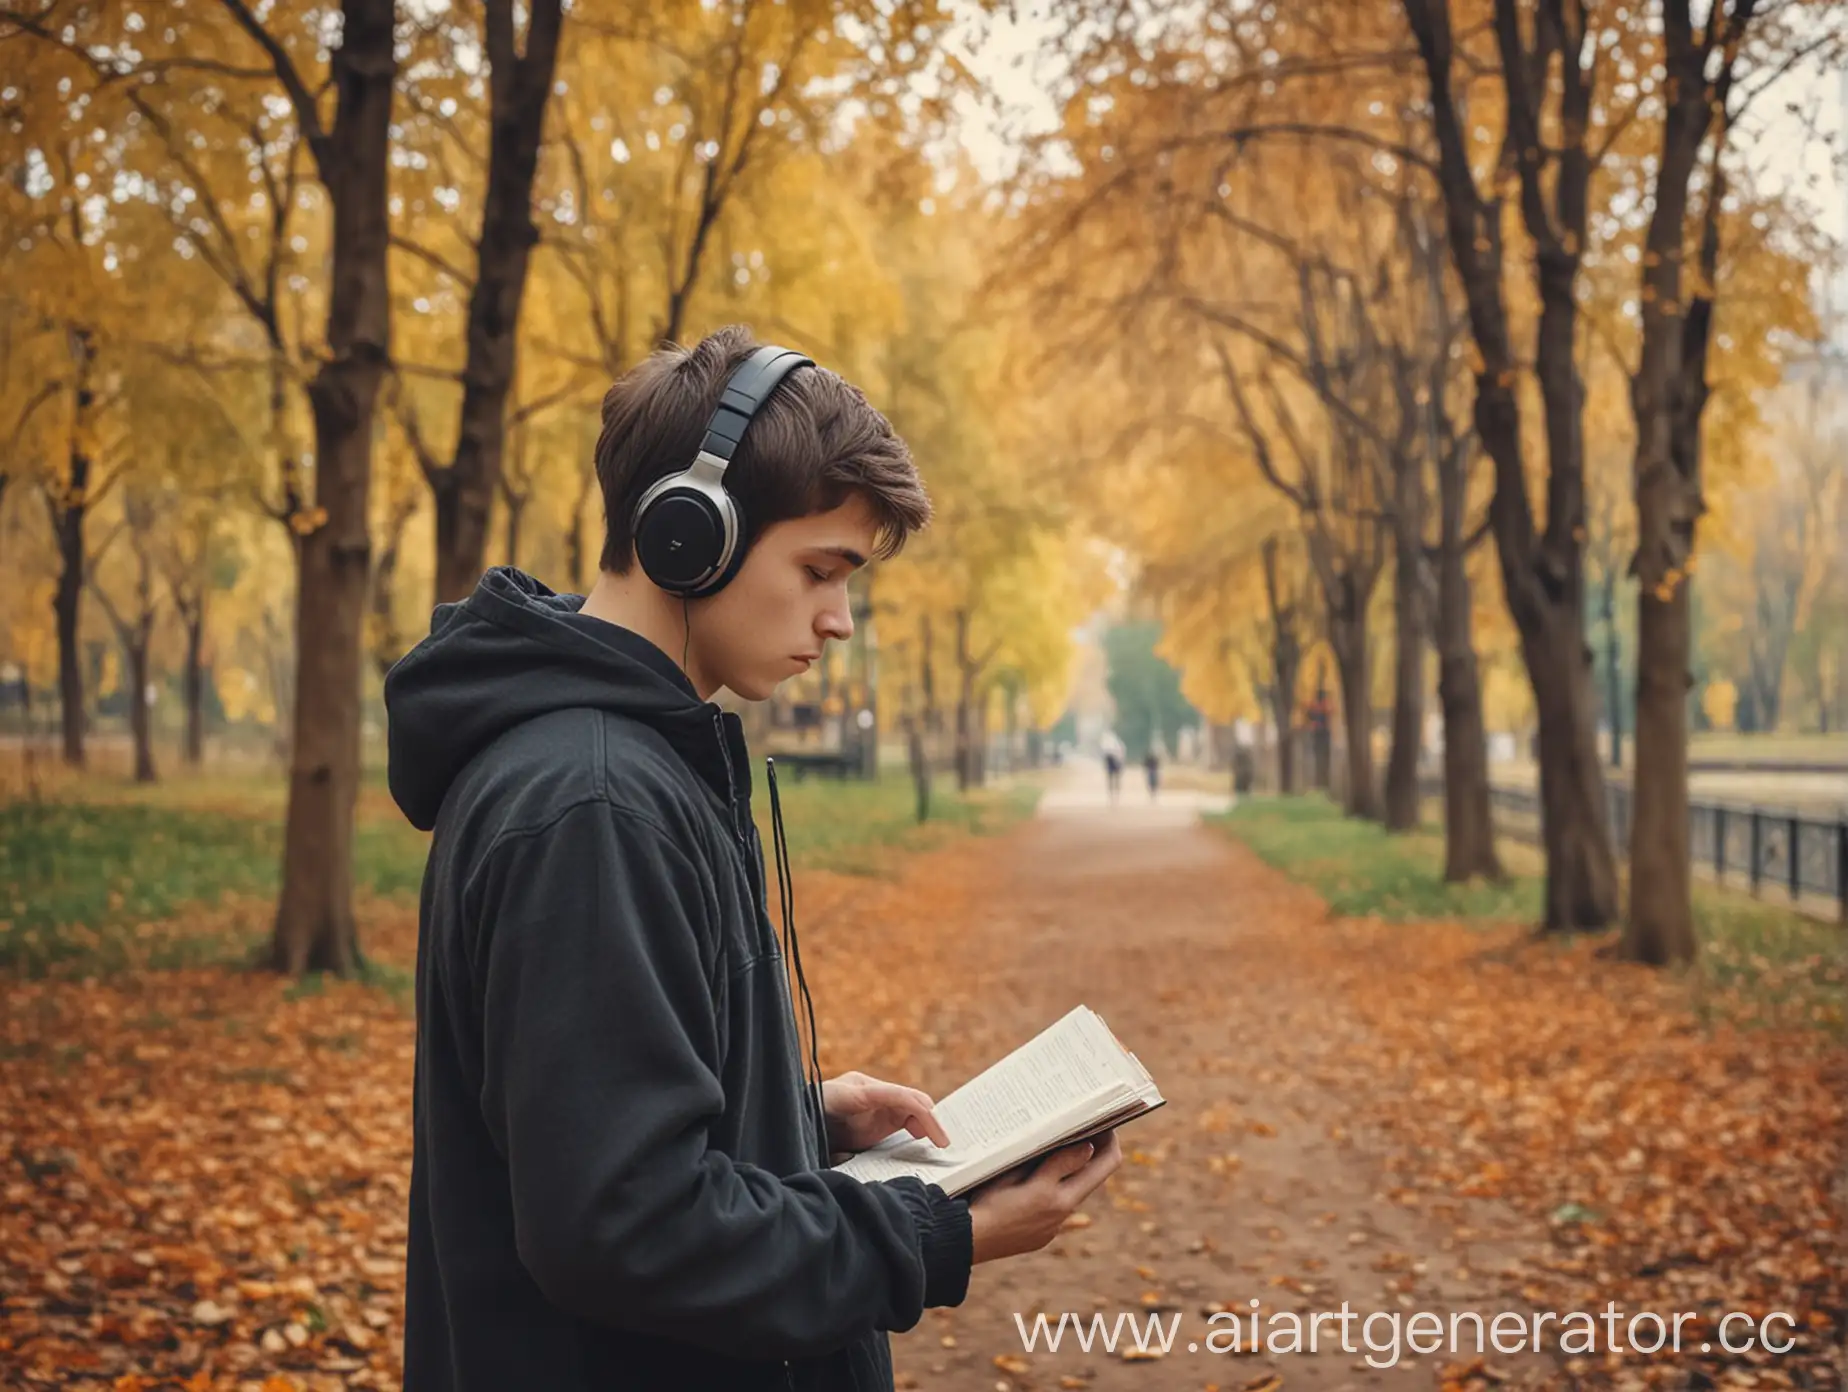 Autumn-Park-Melancholy-Hooded-Figure-in-Headphones-with-Notebook